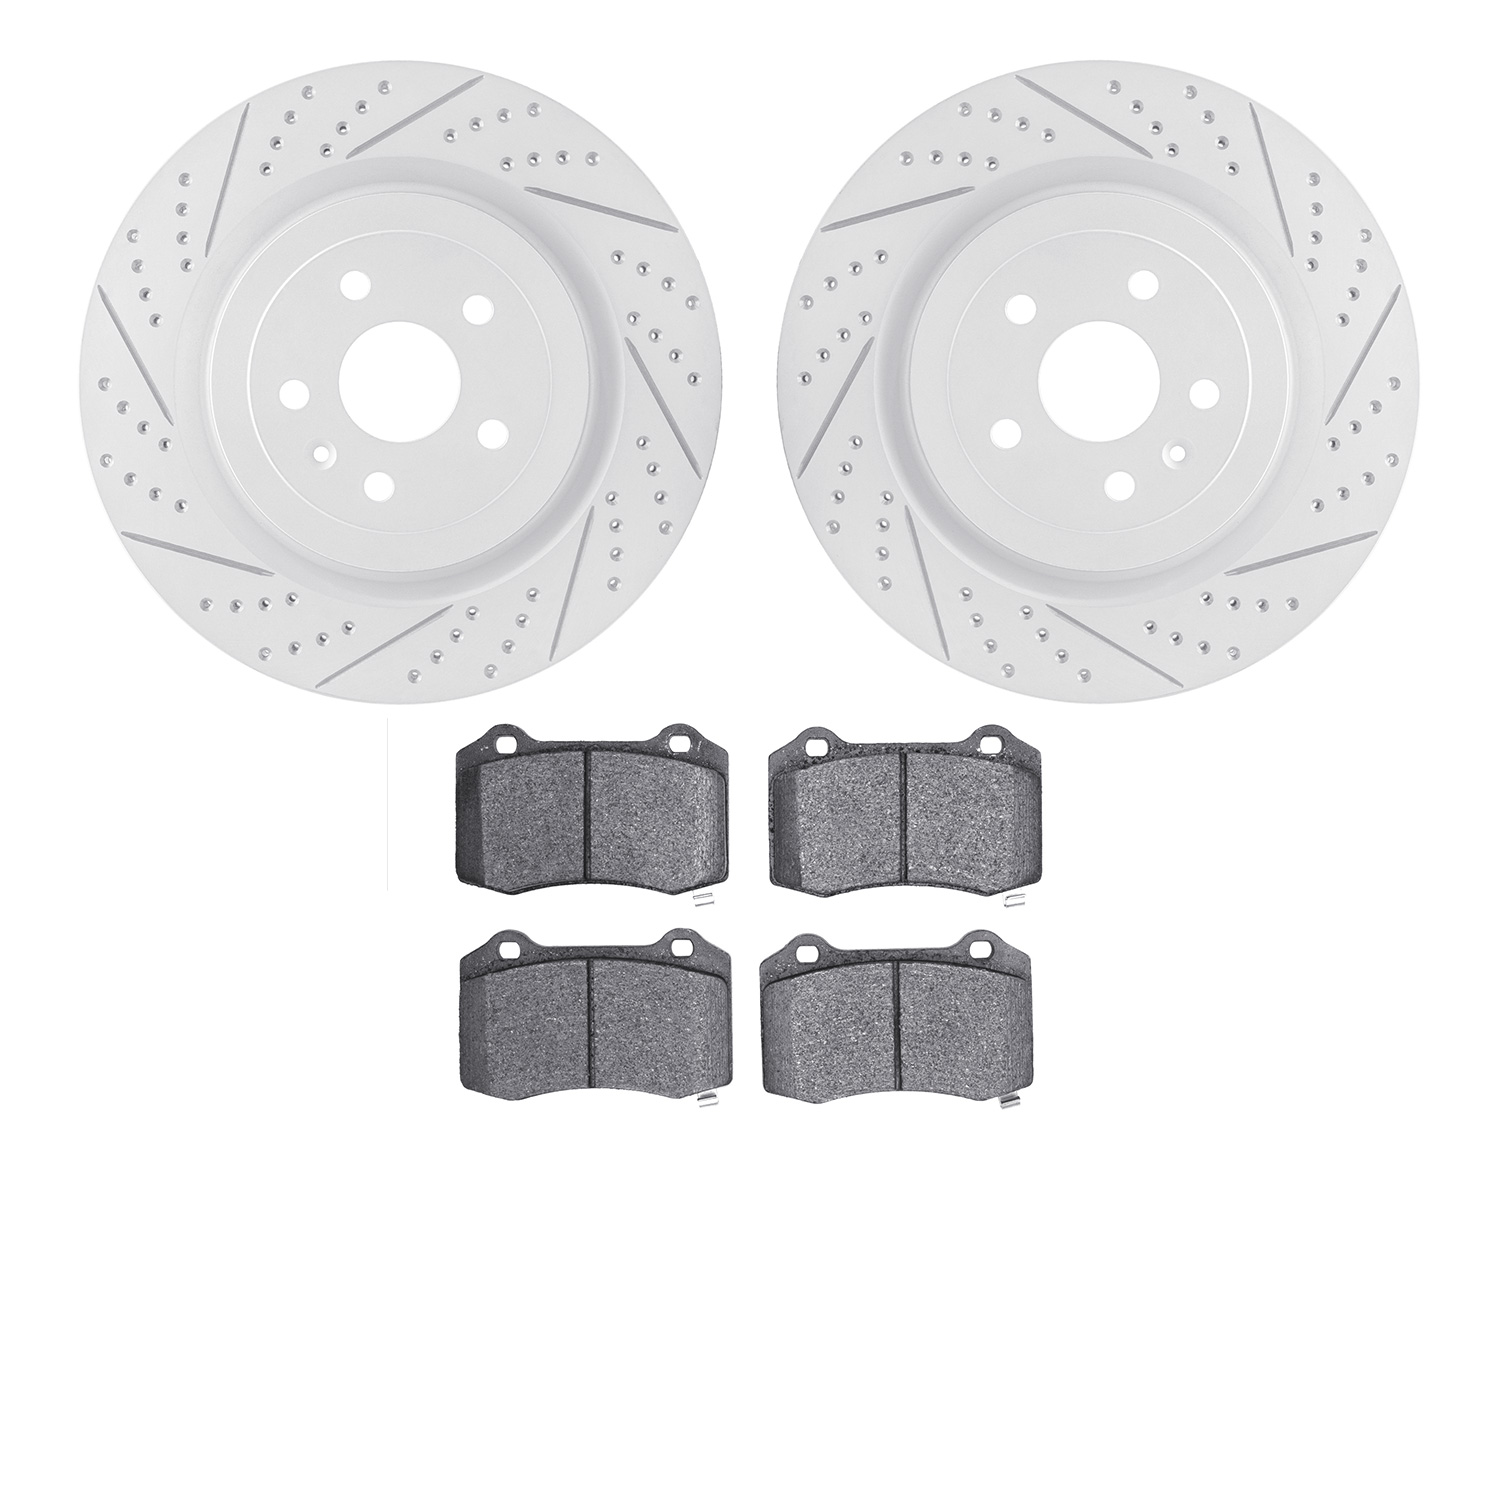 2502-47028 Geoperformance Drilled/Slotted Rotors w/5000 Advanced Brake Pads Kit, Fits Select GM, Position: Rear